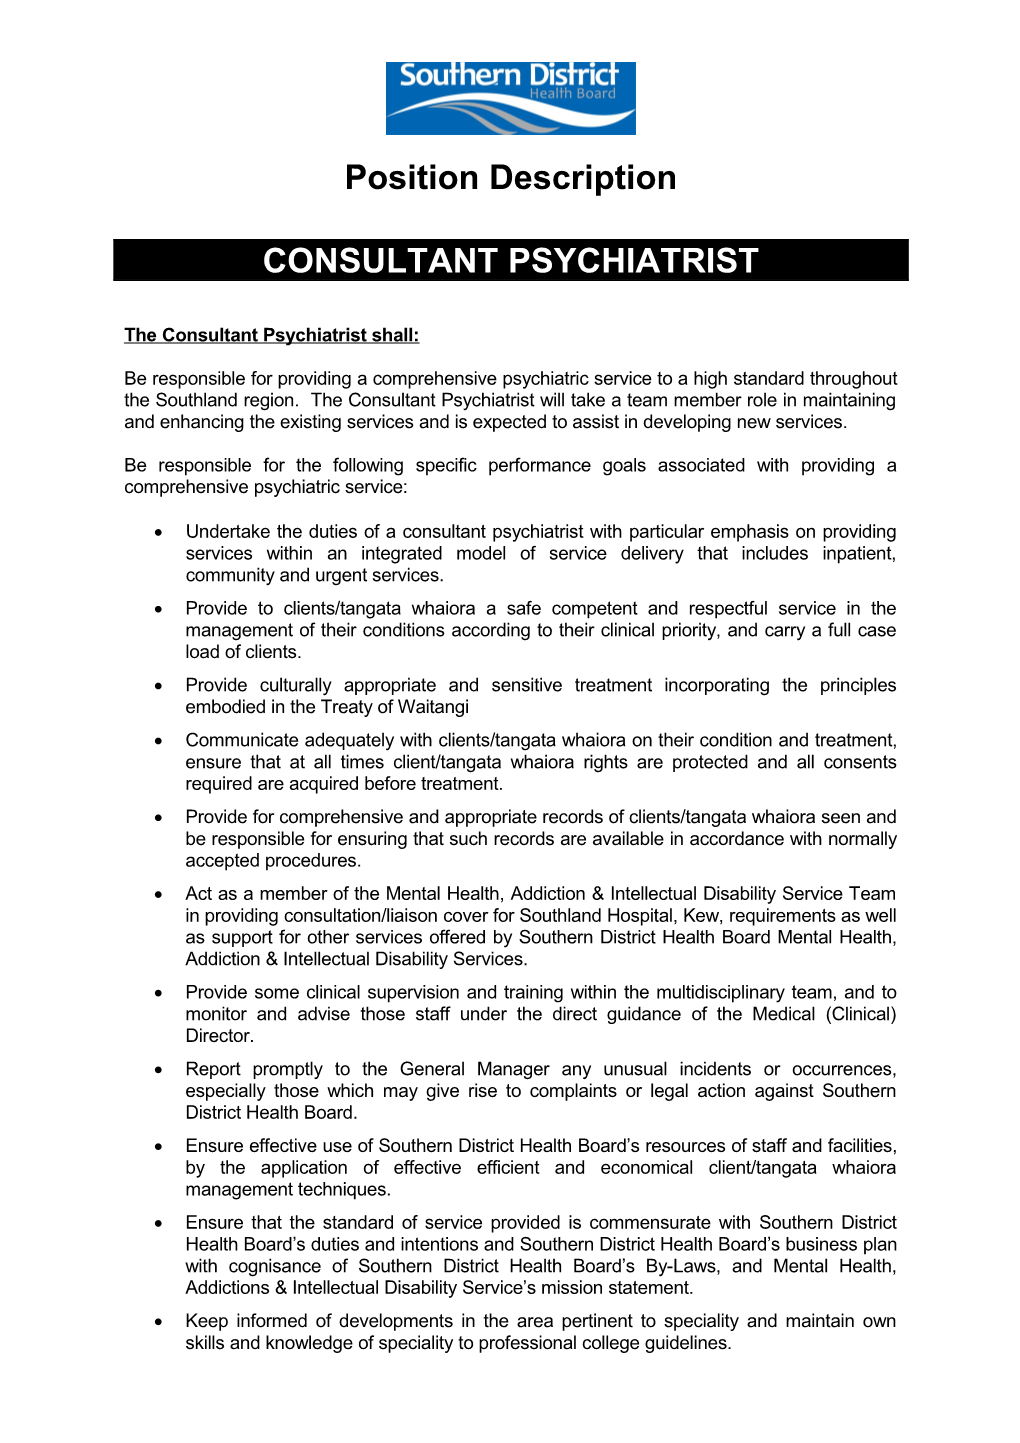 The Consultant Psychiatrist Shall